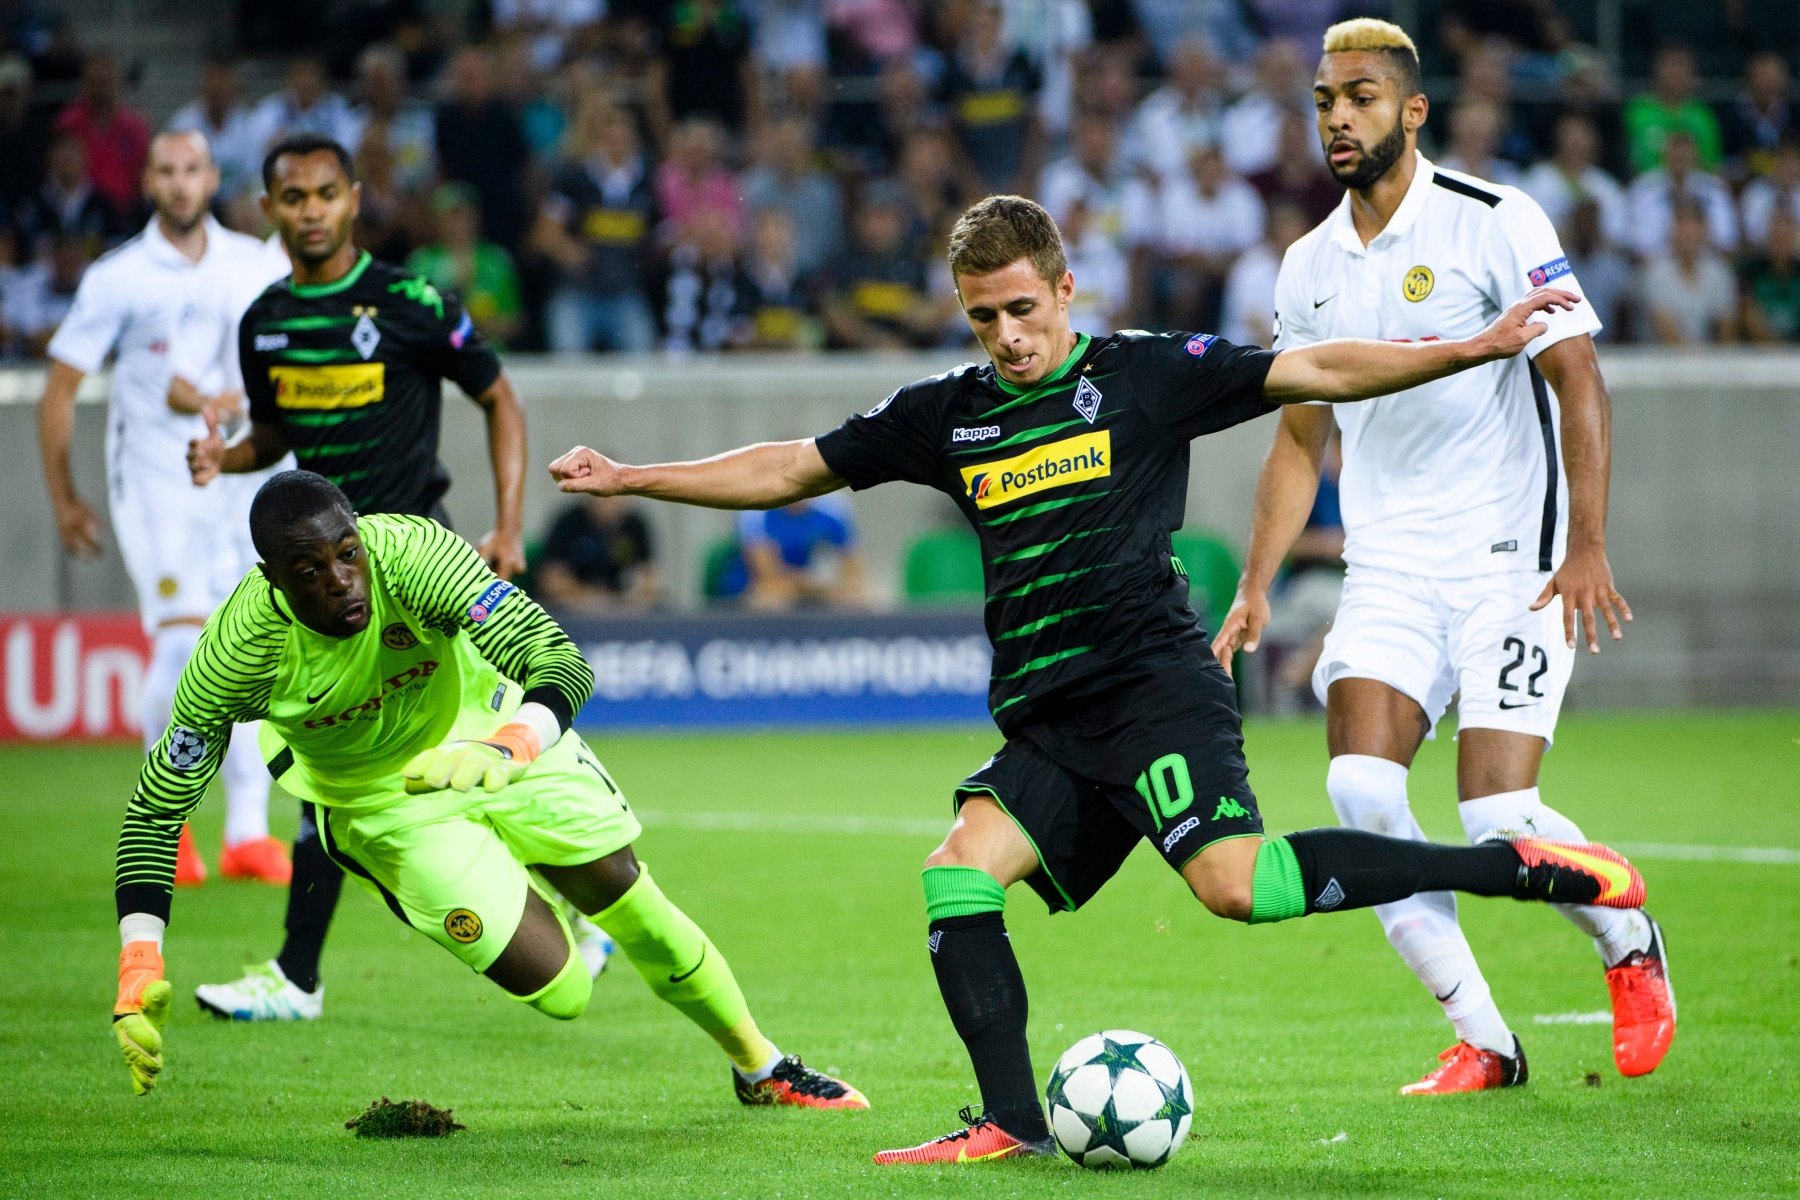 Bern's Goalkeeper Yvon Mvogo left, fights for the ball with Gladbach's Yoric Ravet, left, right before the first goal of the game, during the UEFA Champions League Qualification playoff round second leg match between German Club Borussia Moenchengladbach and Swiss Club BSC Young Boys Bern, at the Borussia Park Stadium in Moenchengladbach, Germany, Wednesday, 24 August 2016.  (KEYSTONE/Manuel Lopez) SCHWEIZ FUSSBALL CL 2016/17 PLAY OFF MOENCHENGLADBACH YB